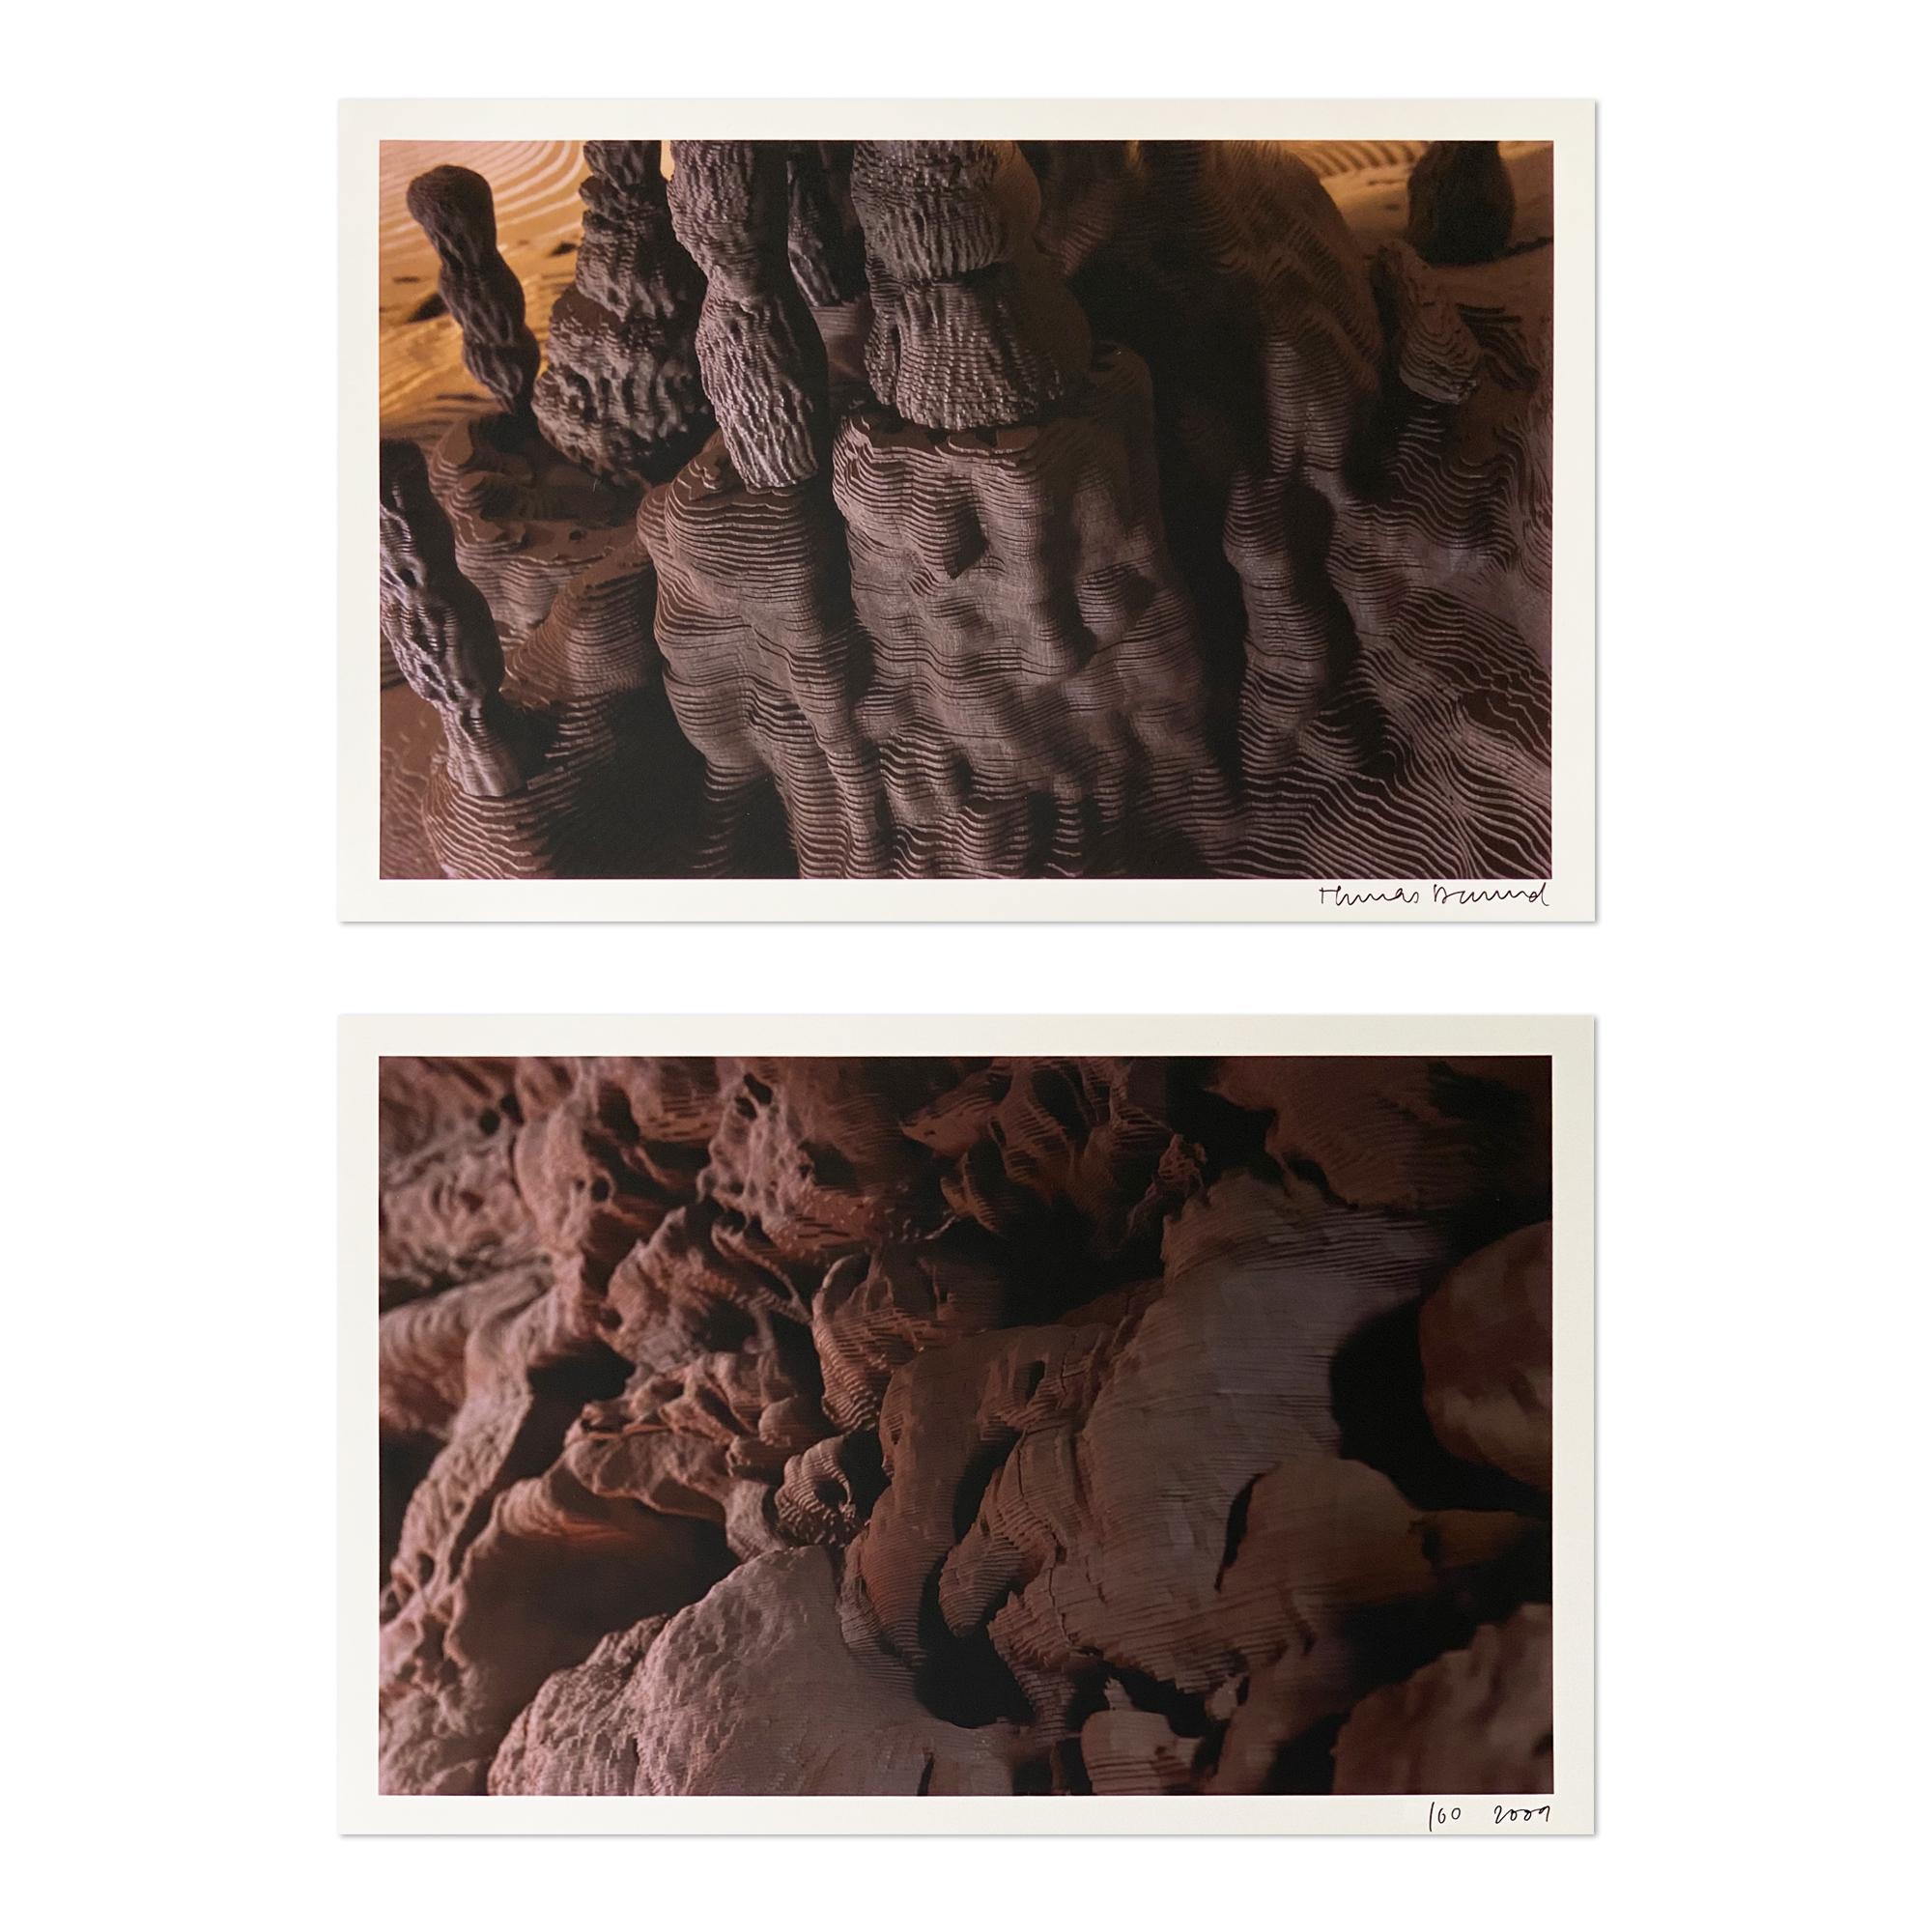 Thomas Demand Abstract Print - Grotto (from Catalogue Serpentine Gallery, Collector’s Edition), 2 Photographs